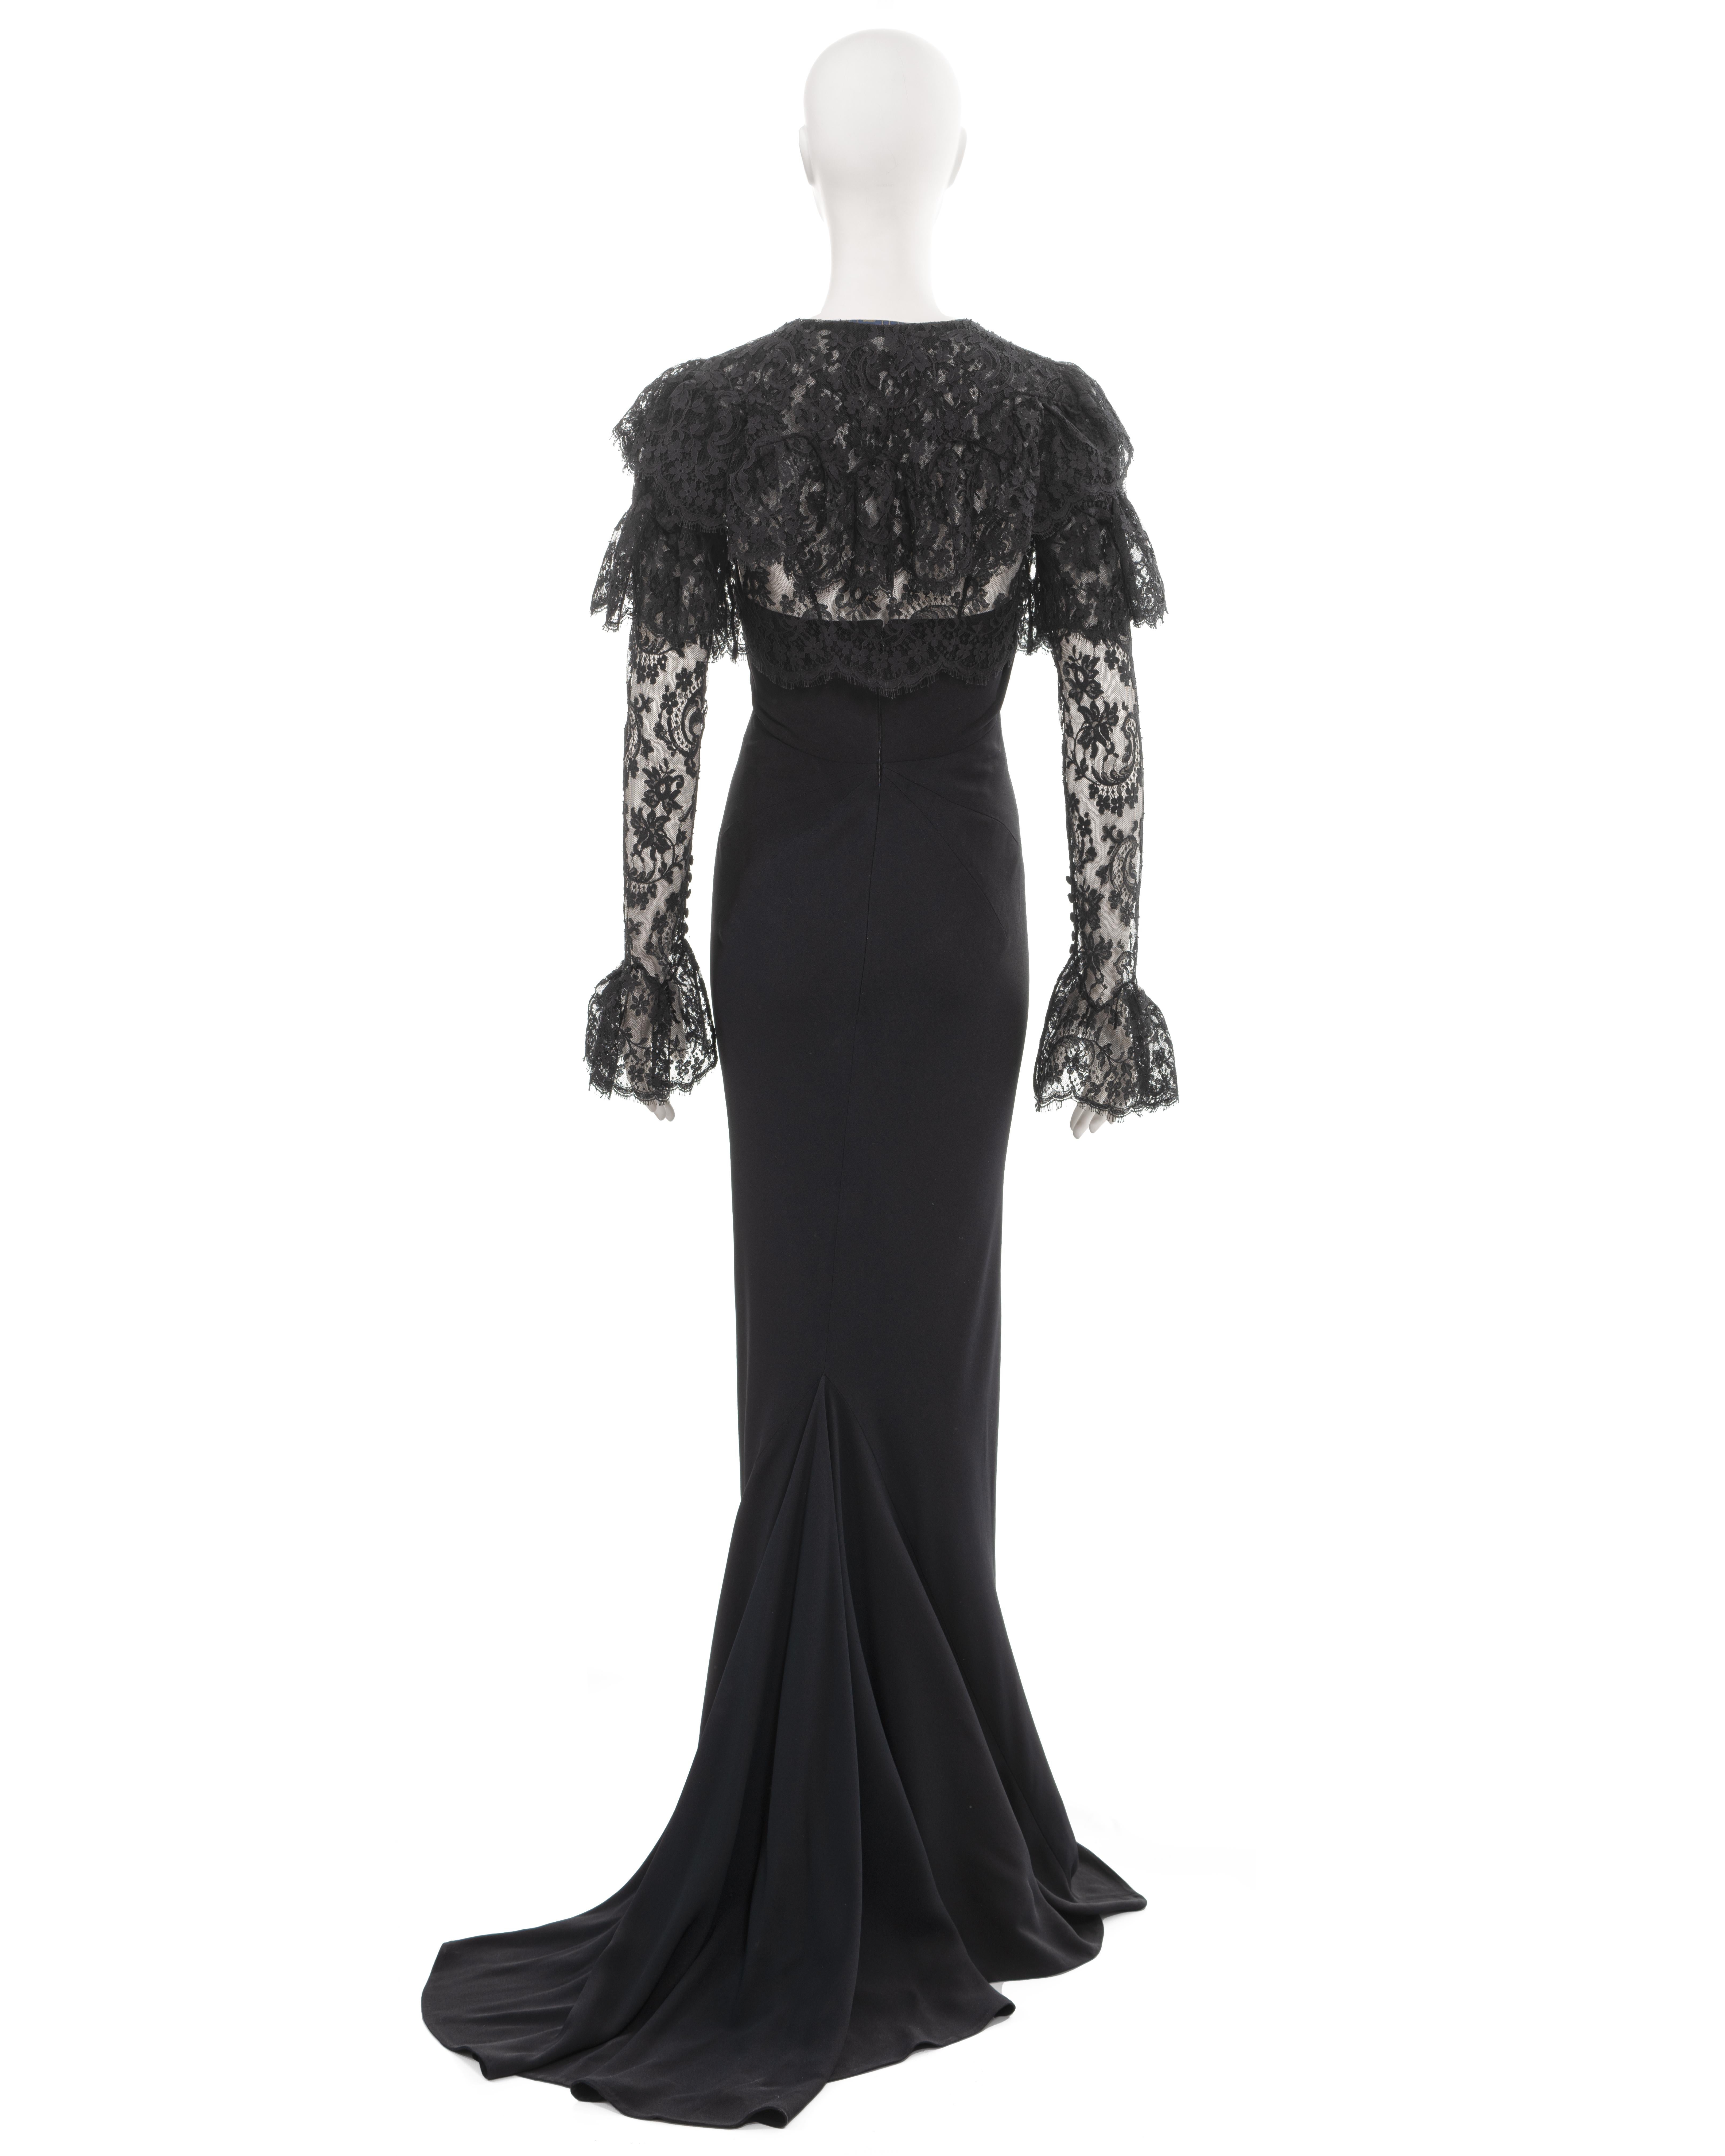 Givenchy by John Galliano black strapless evening dress and lace bolero, ss 1997 For Sale 13